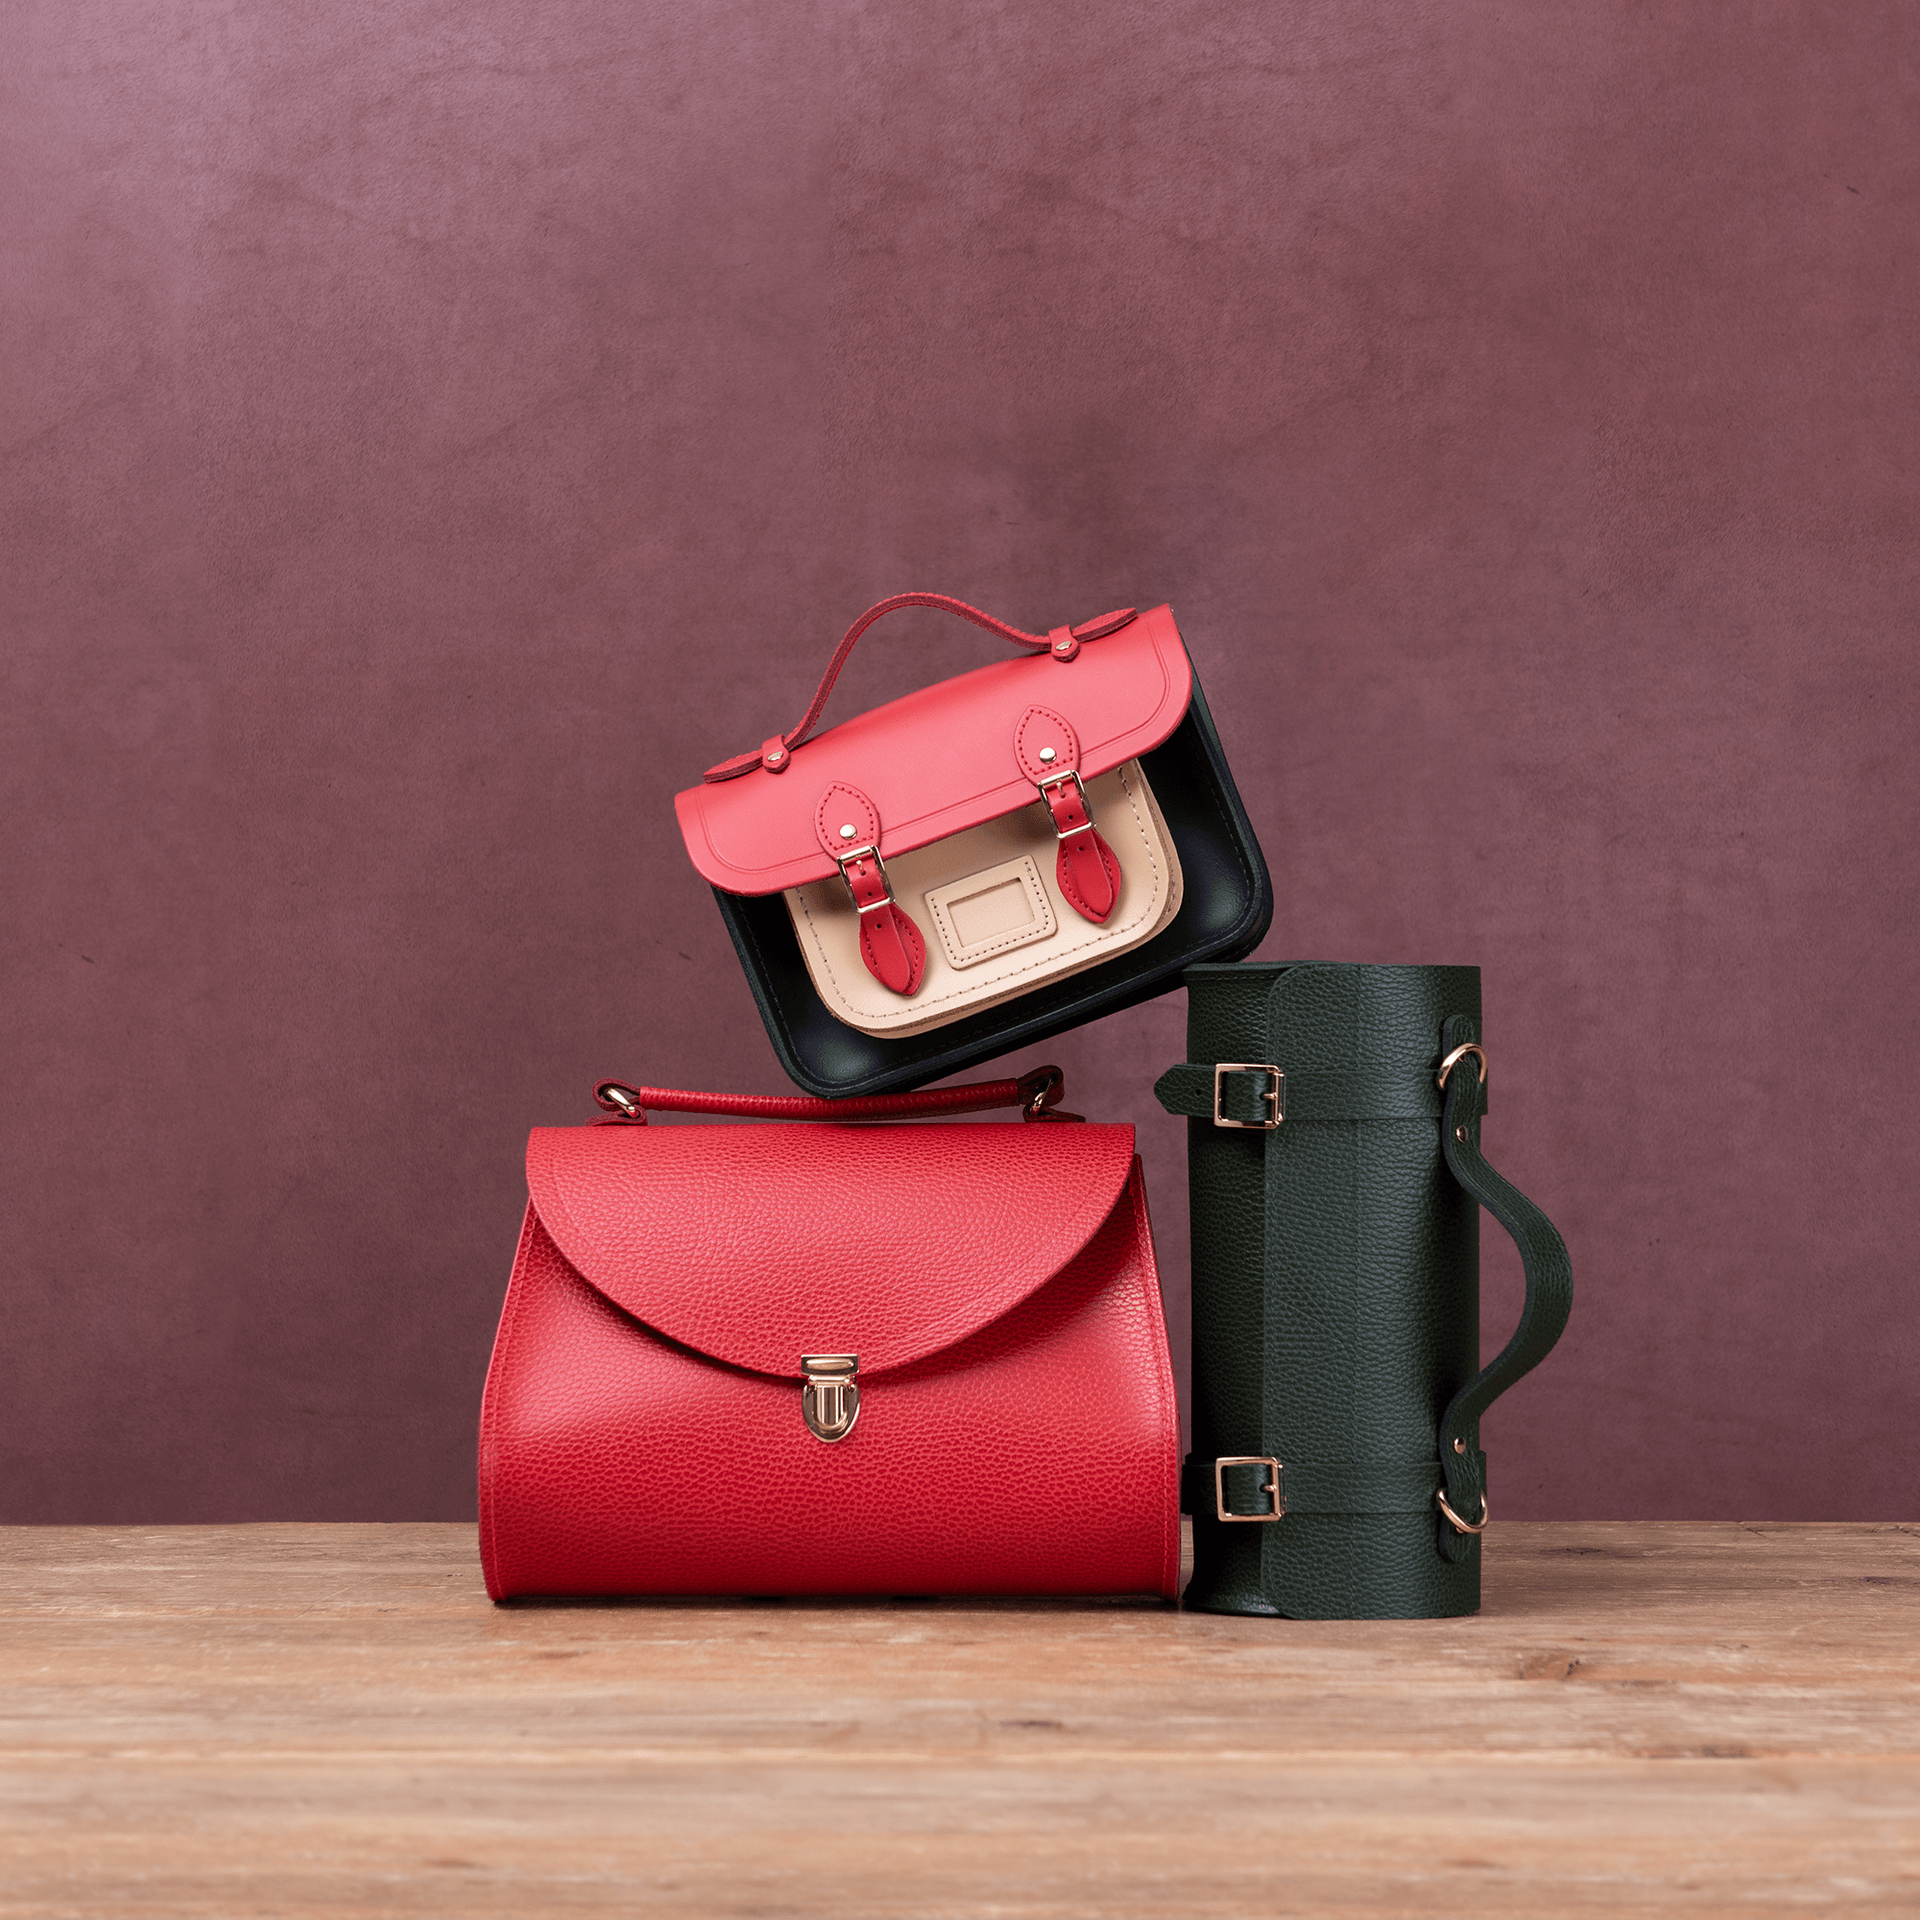 The Christmas Collection - Cambridge Satchel US Store